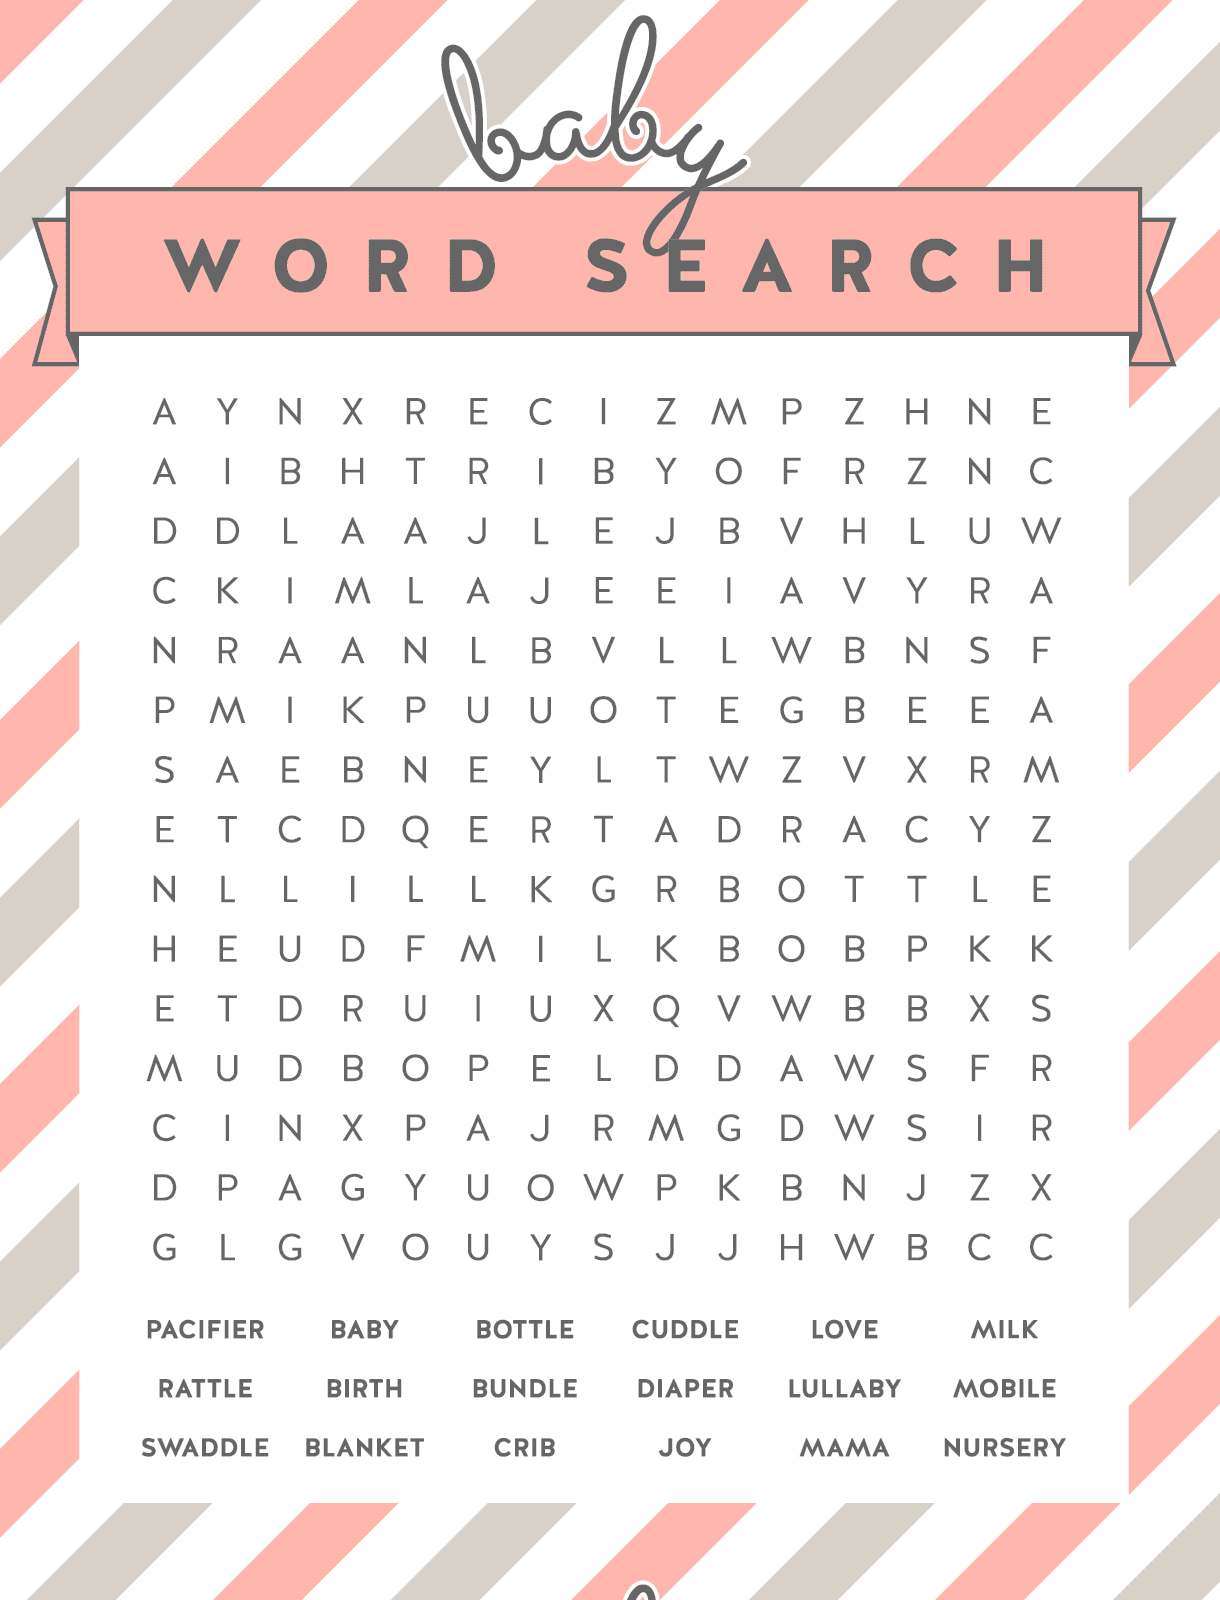 Free Baby Shower Word Search Puzzles - Printable Baby Crossword Puzzles